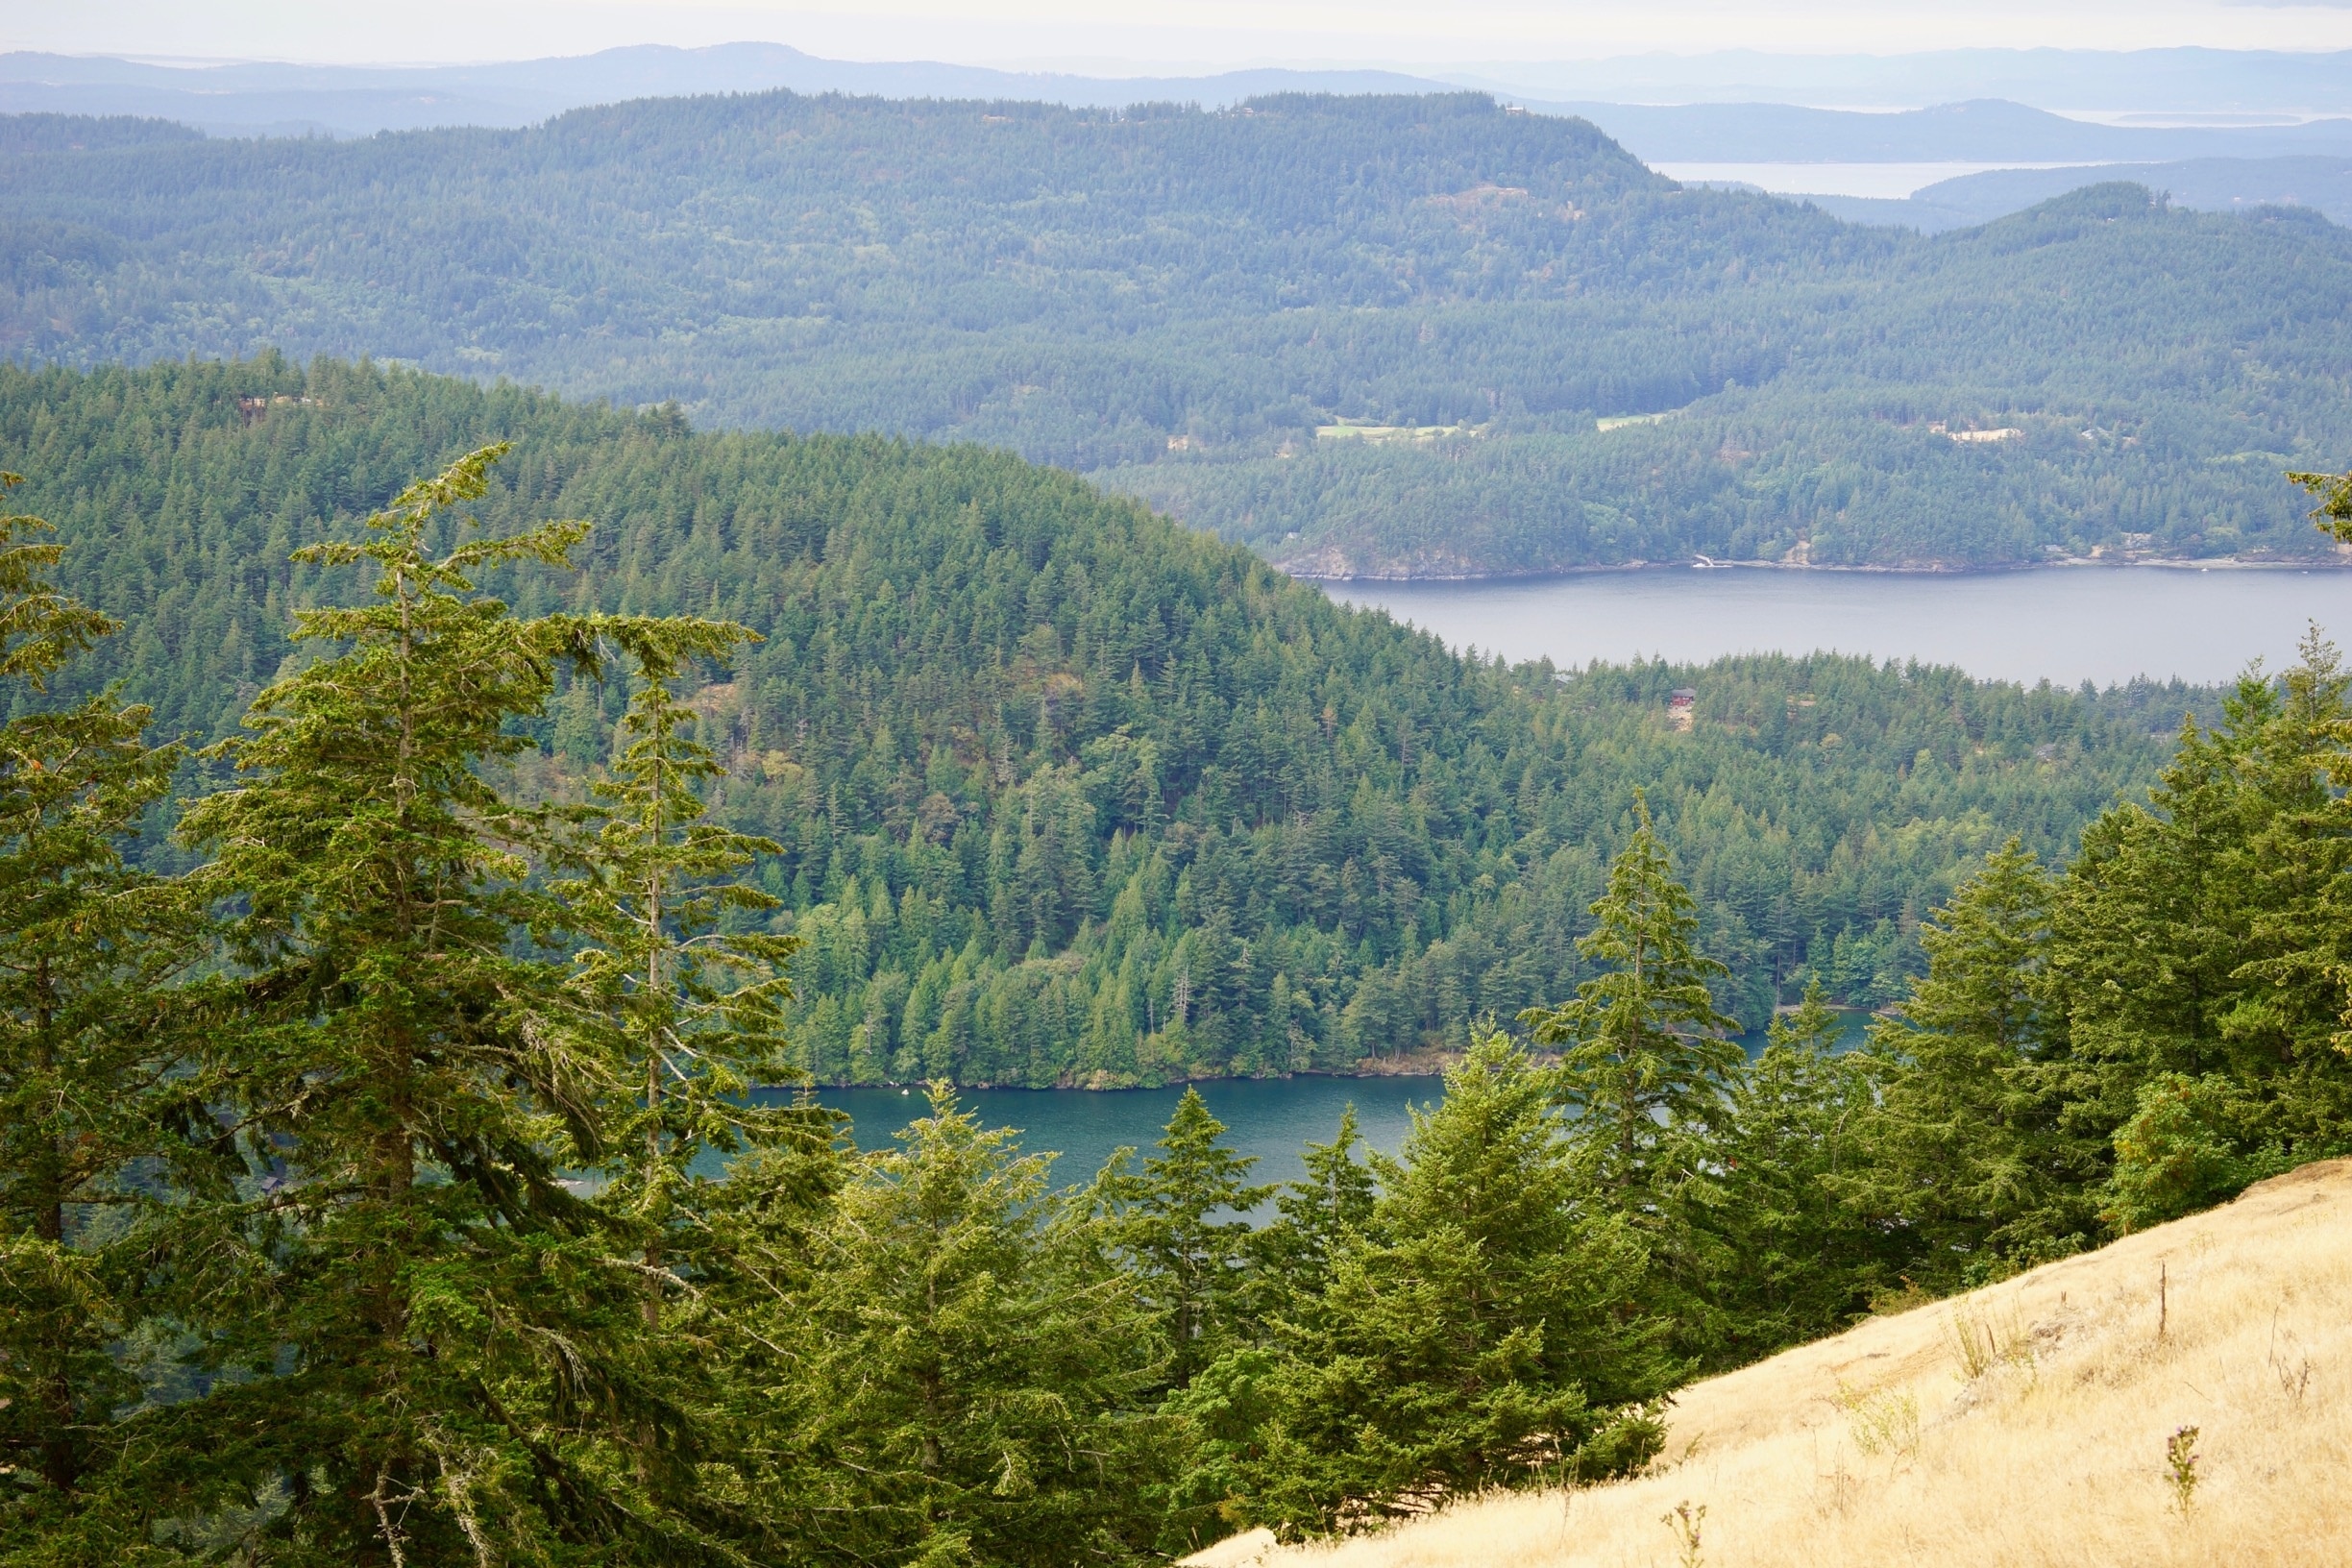 You can drive to the top of Mount Constitution on Orcas island and on a clear day you can see the other islands of the San Juan Islands. This is a view of a couple of lakes on Orcas island from the road up to the top of Mount Constitution.